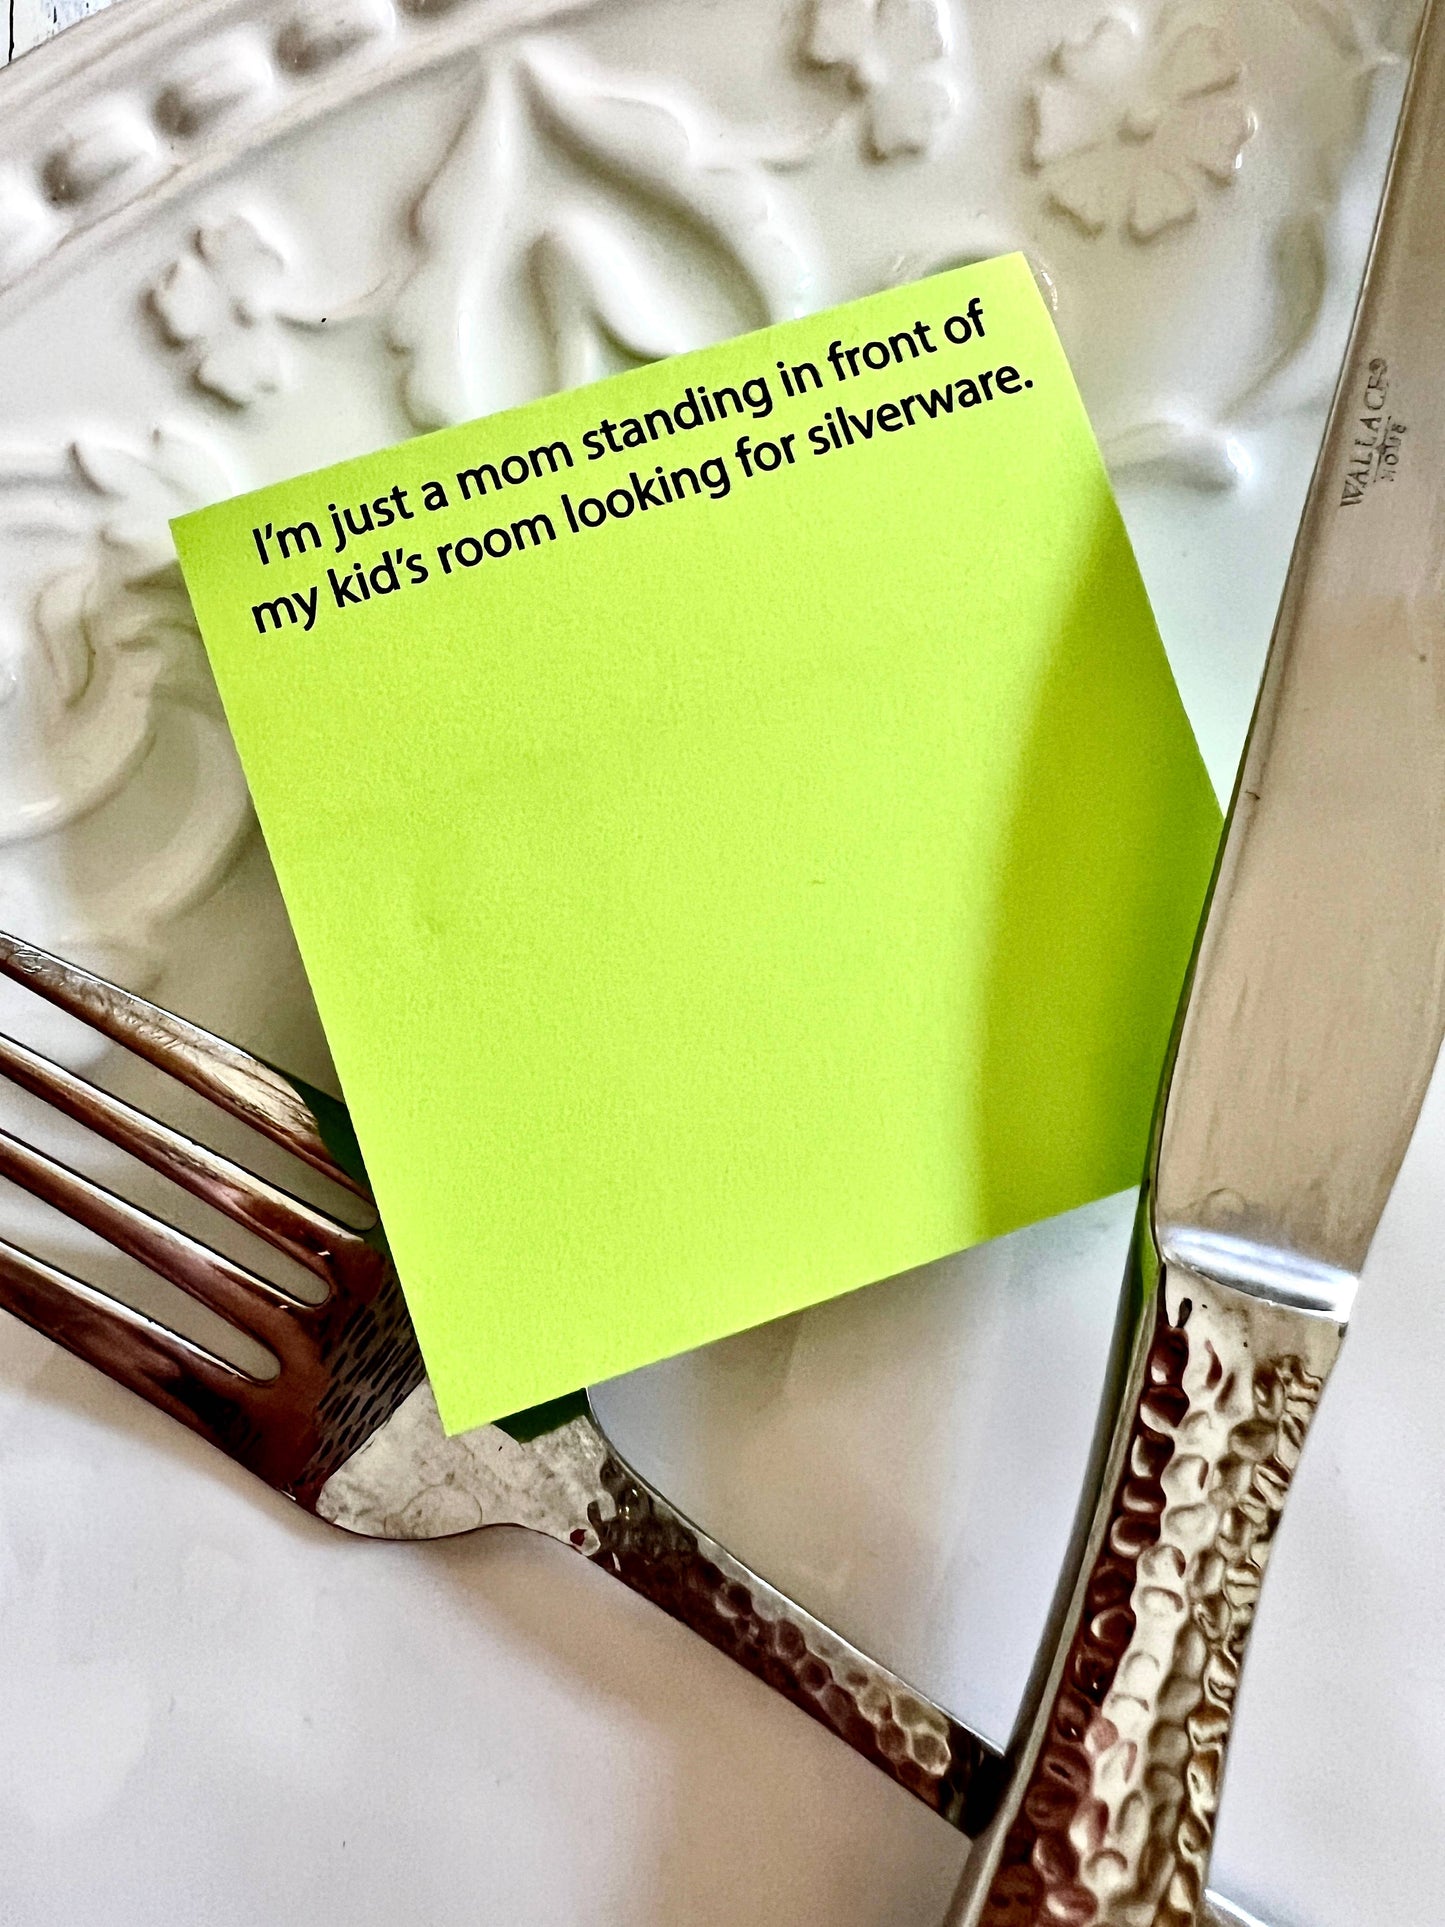 I'm just a mom looking for silverware - Sticky Notes